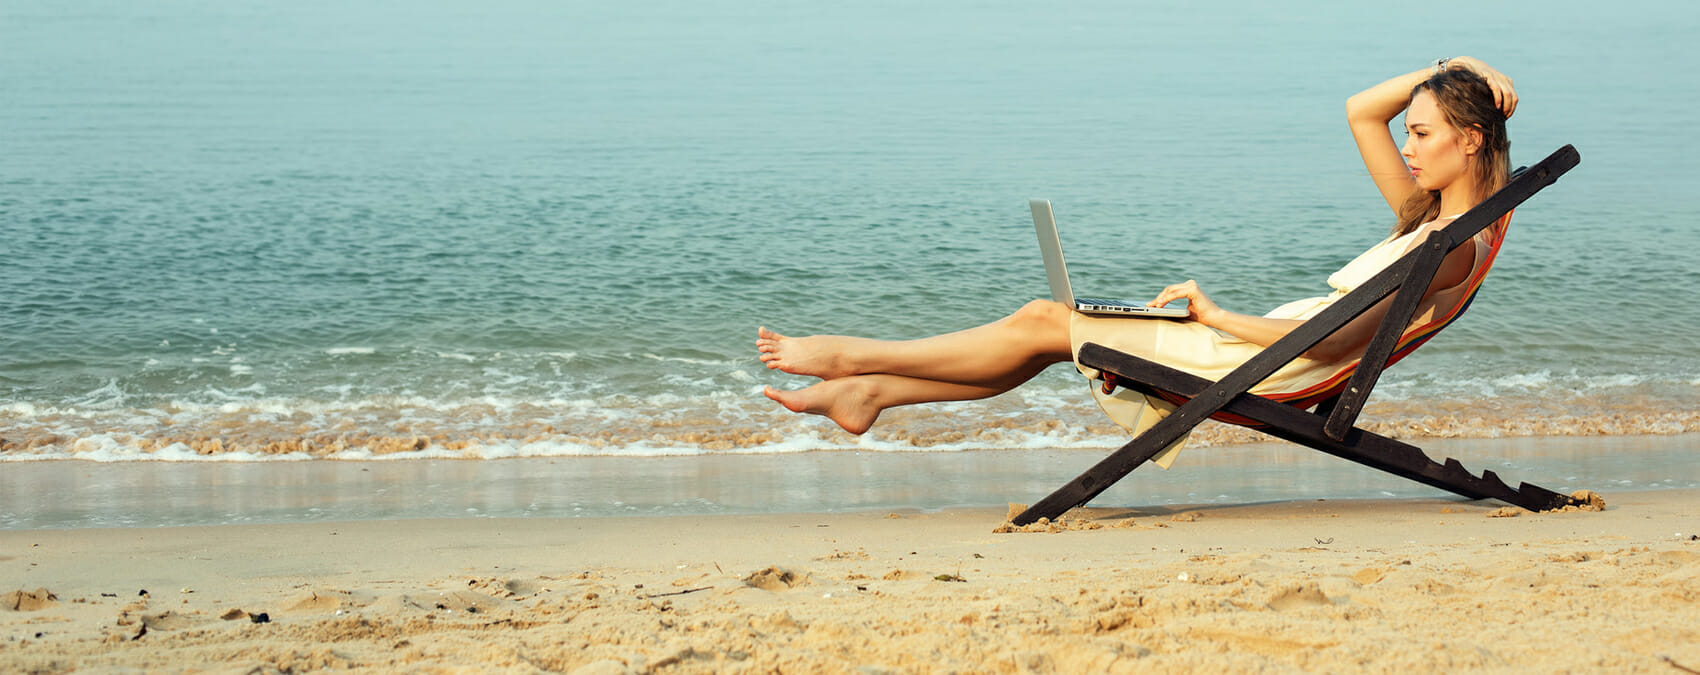 Woman relaxing on a beach in a beach chair while working on a laptop in her lap